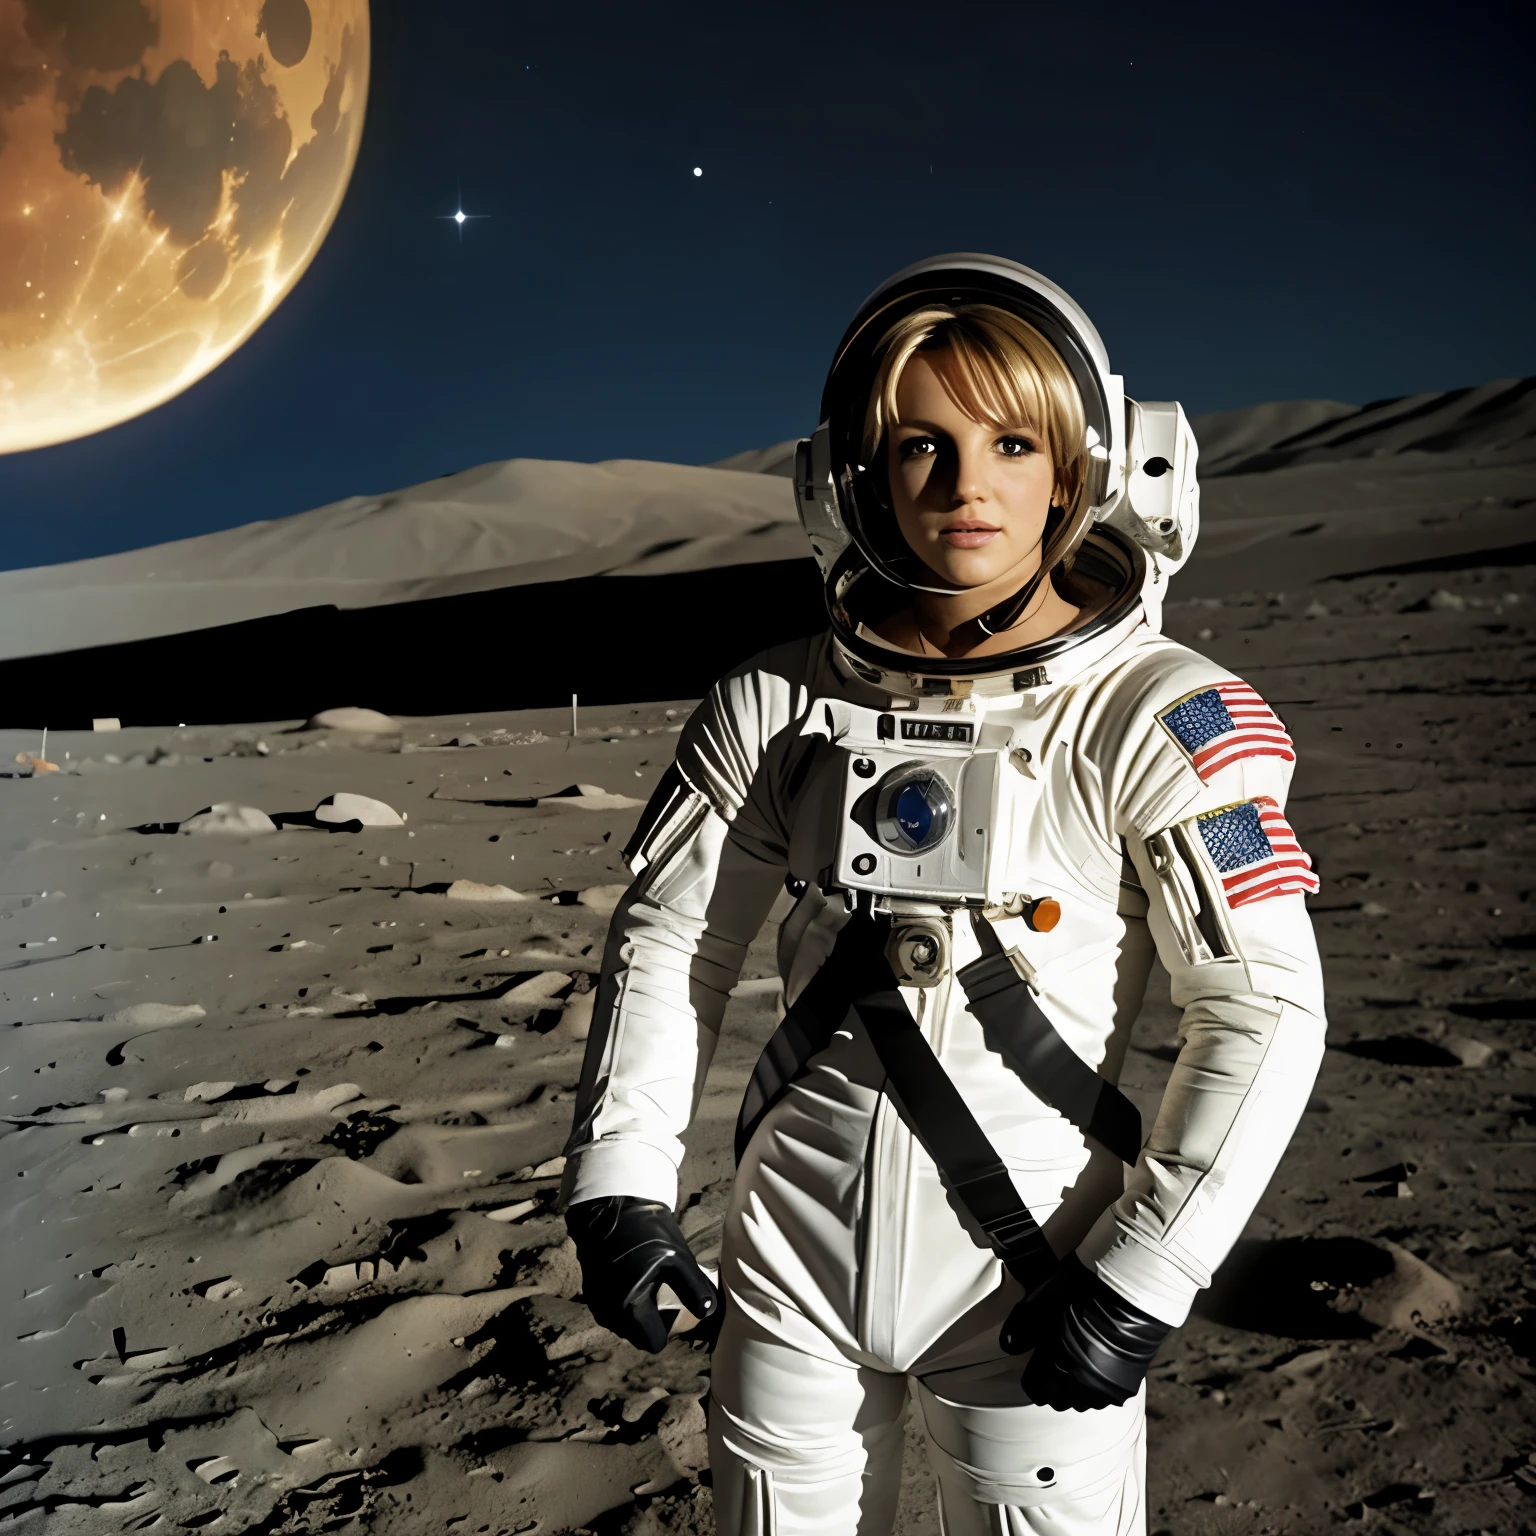 Britney Spears astronaut costume, Britney Spears from the moon,